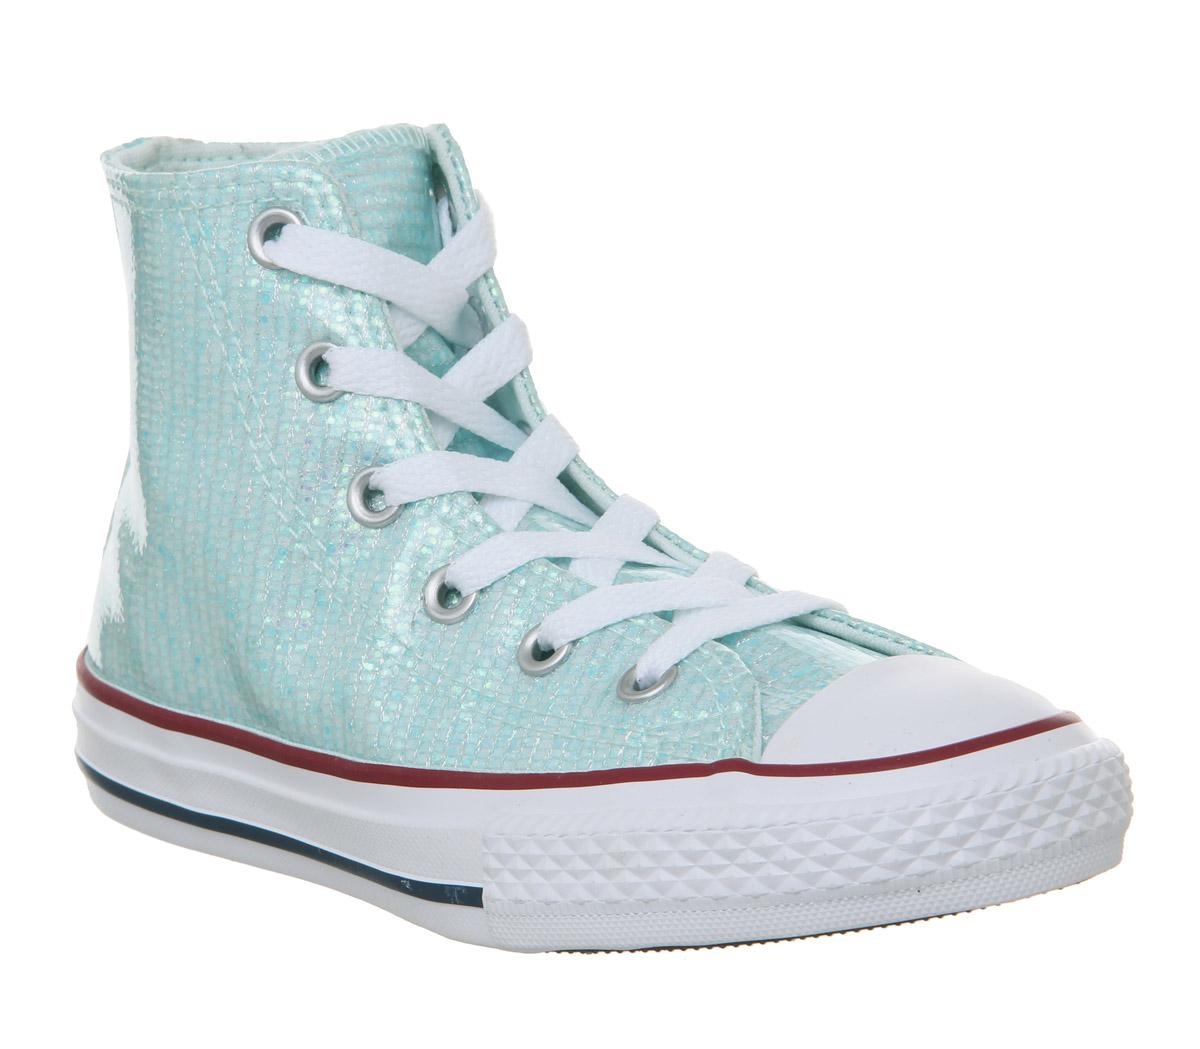 ConverseAll Star Hi Mid Sizes TrainersTeal Tint Glitter White